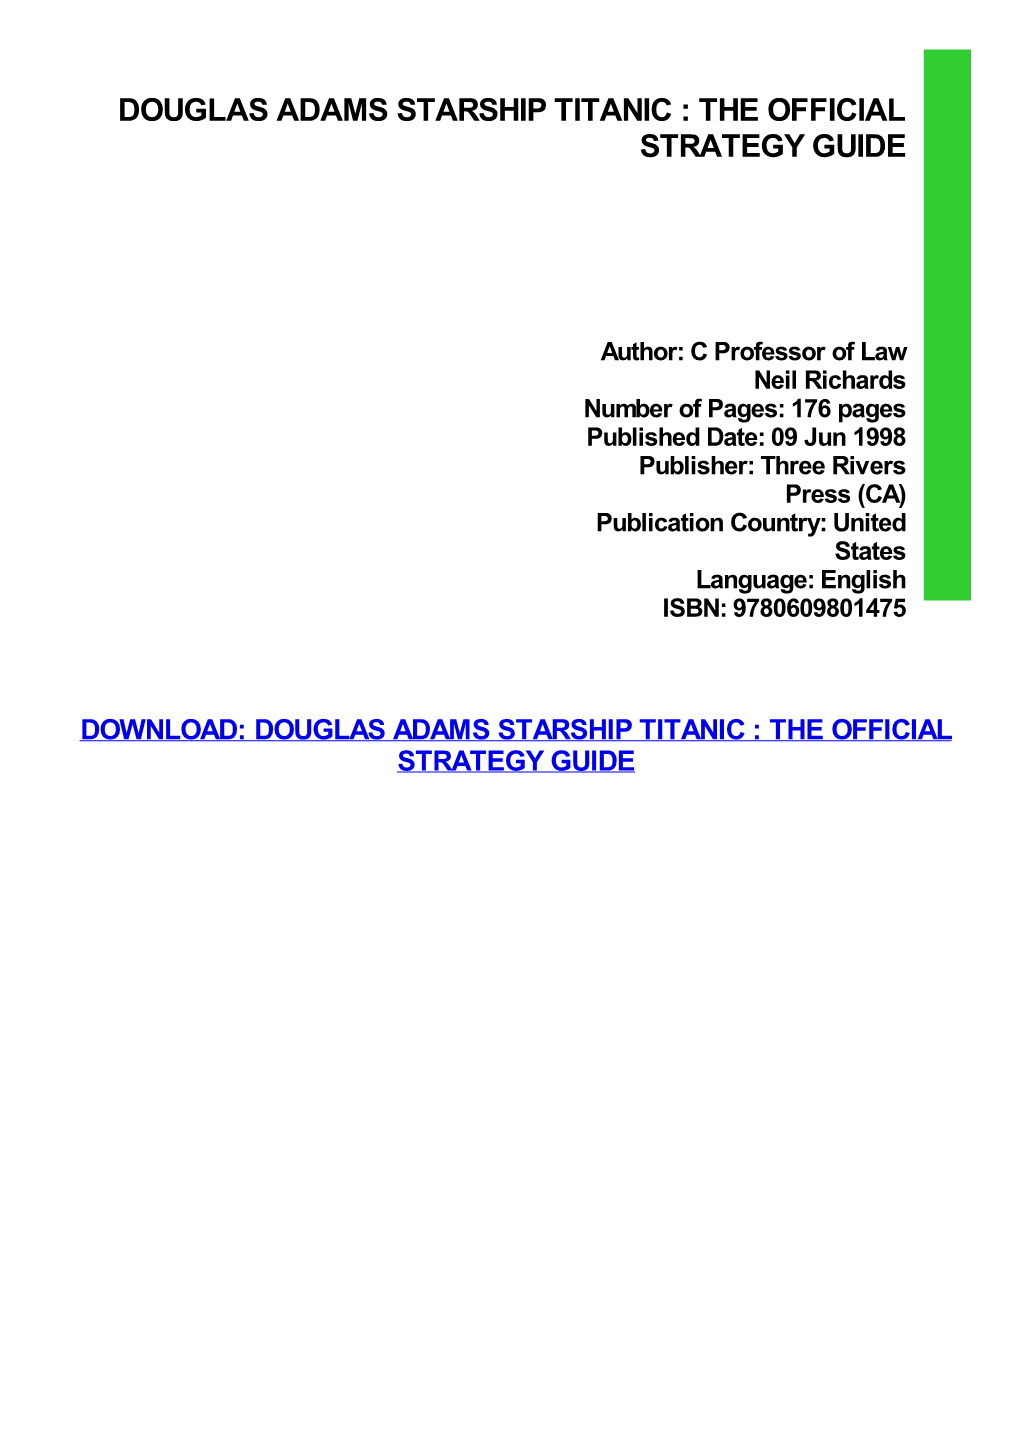 Douglas Adams Starship Titanic : the Official Strategy Guide